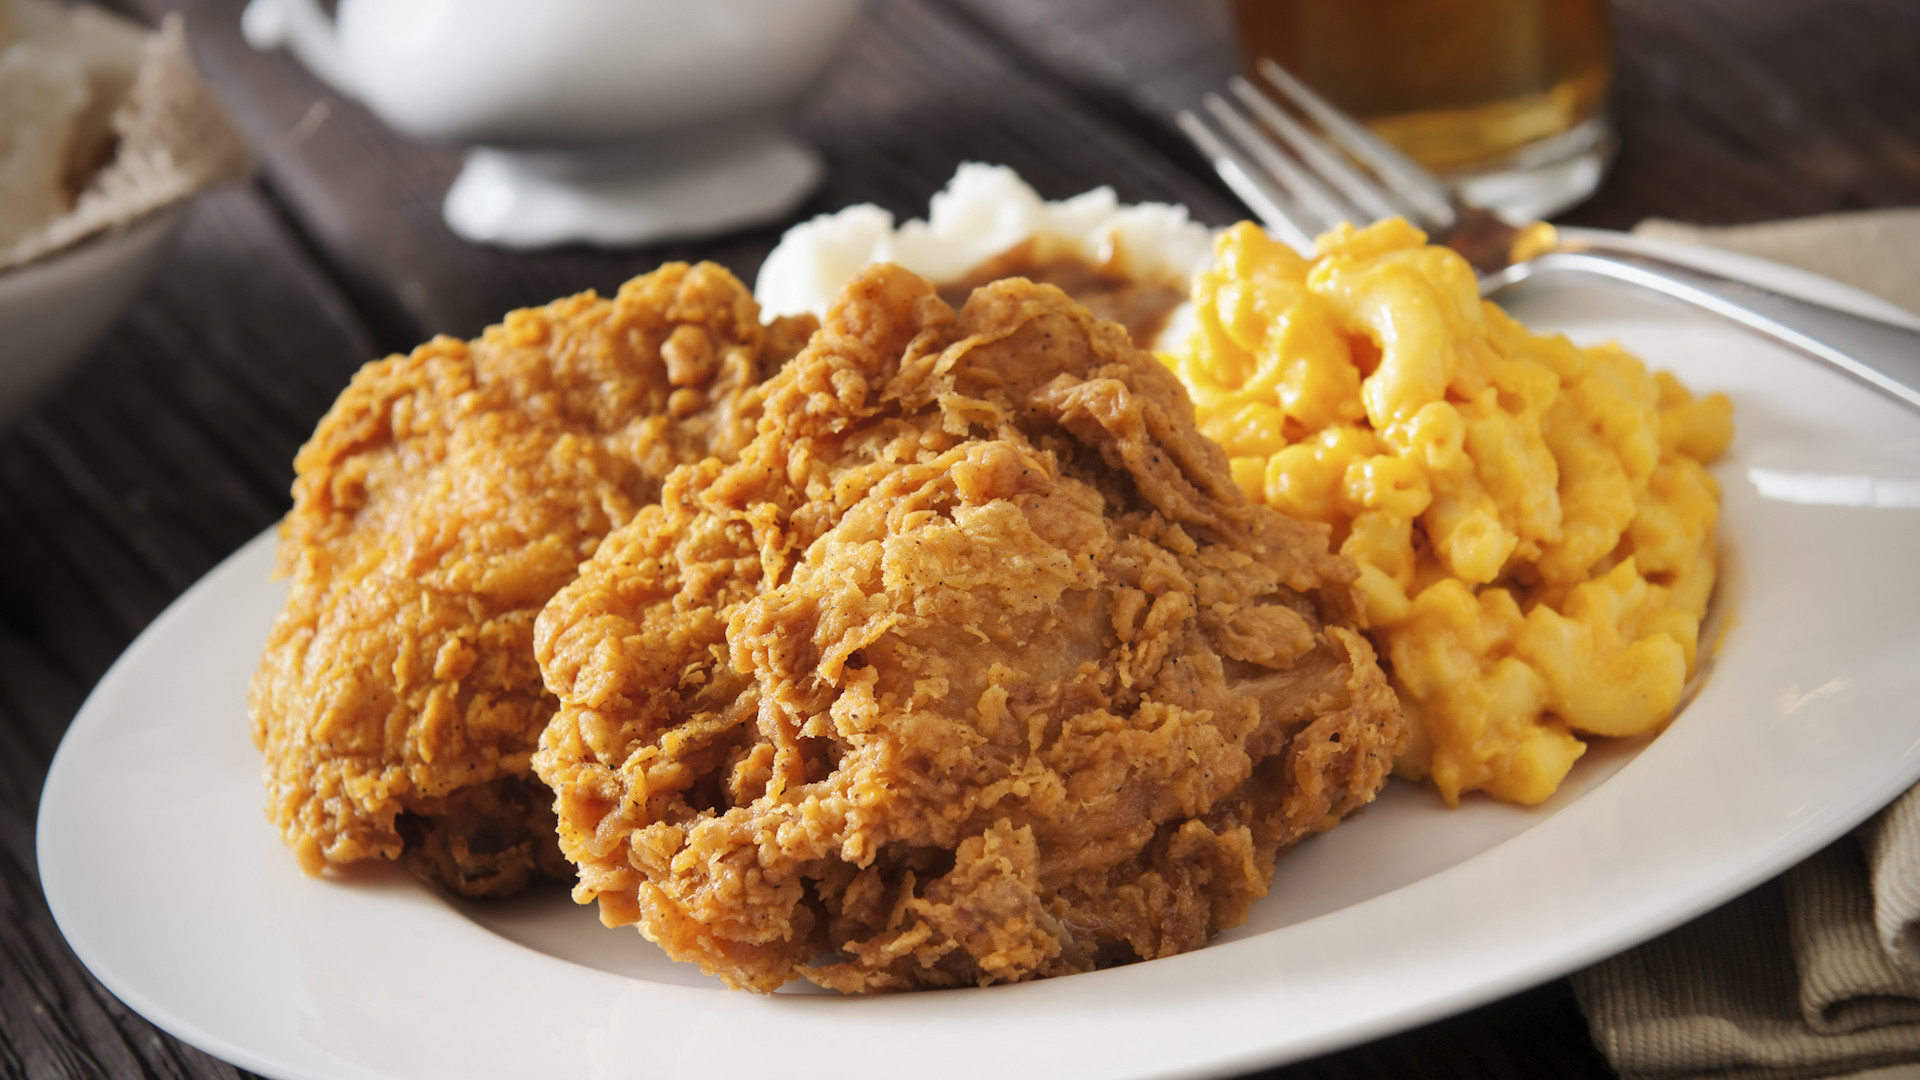 Fried Chicken Mac and Cheese Lovely Mac and Cheese Fried Chicken is the Food Mashup We’ve Been